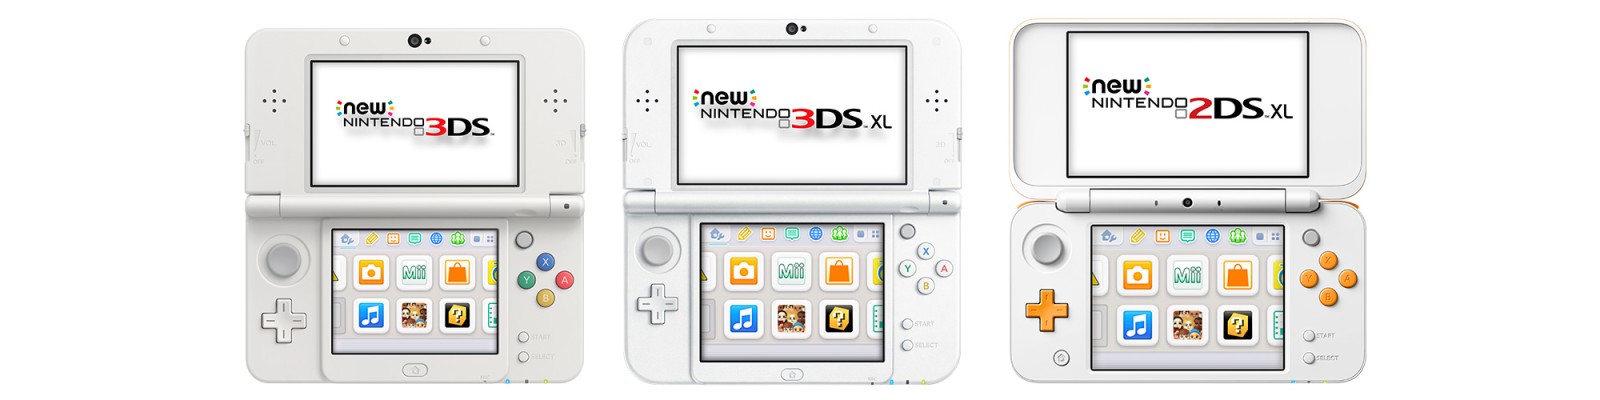 New Nintendo 3DS Family Support